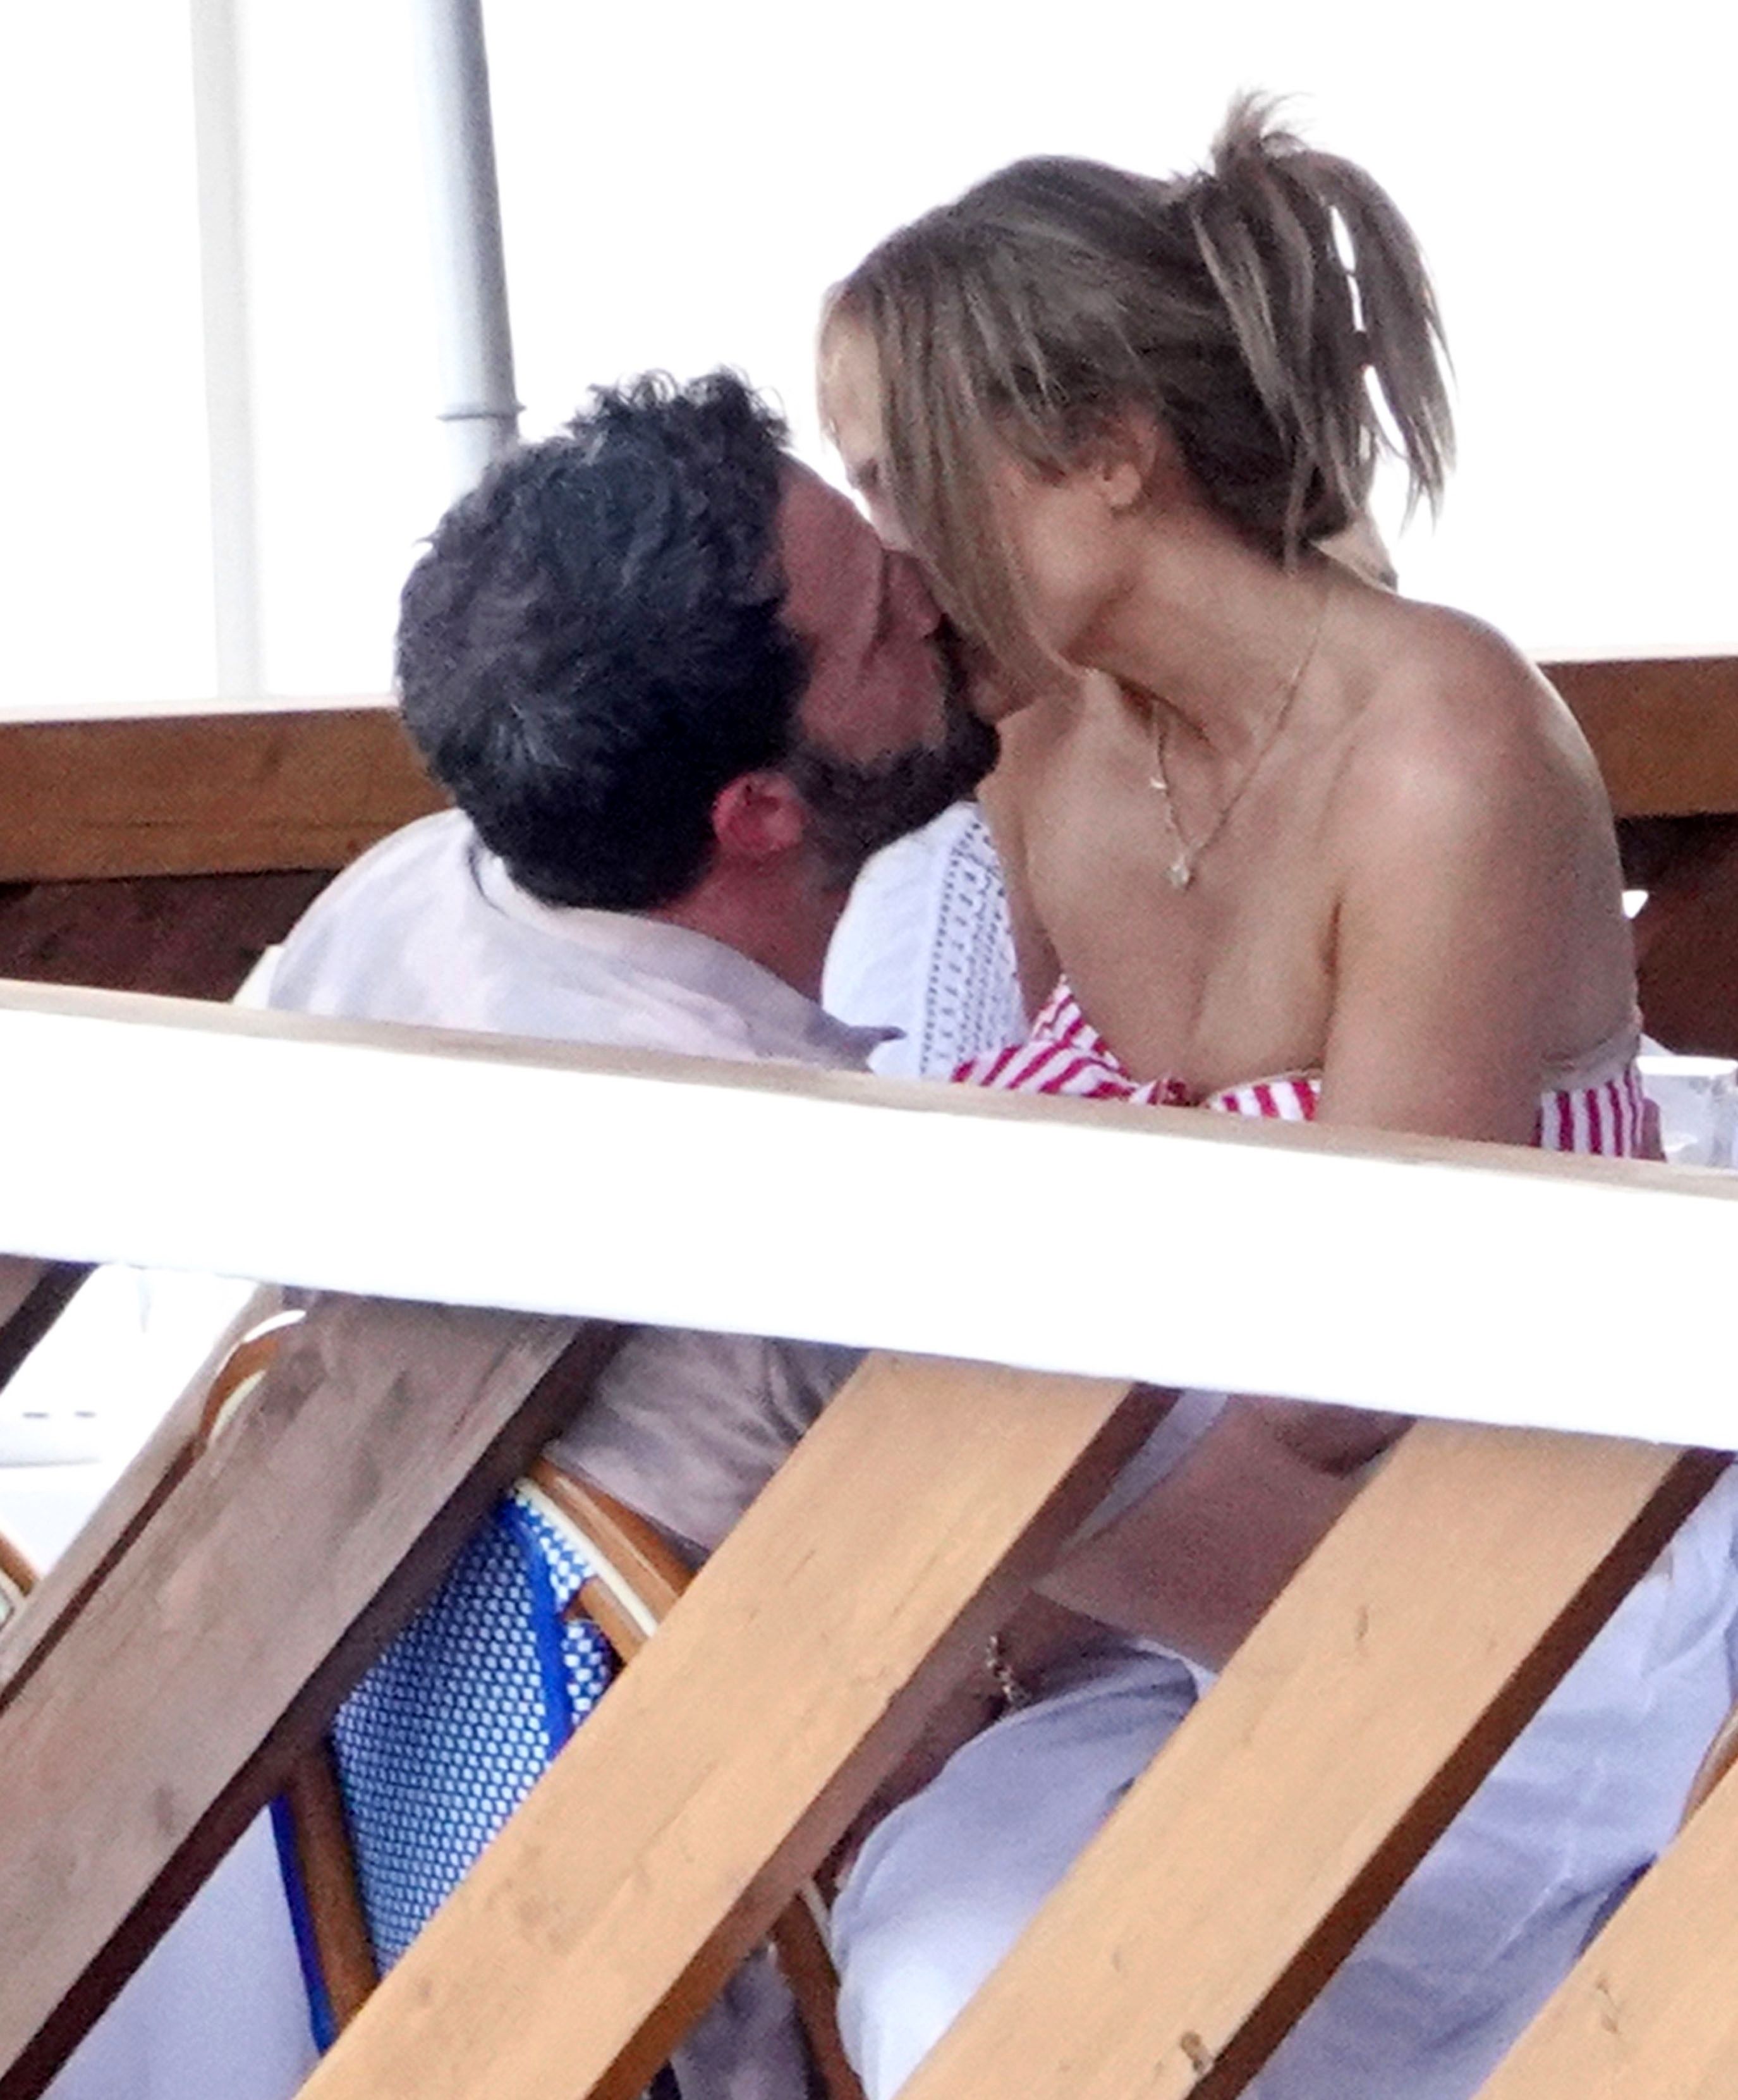 See Jennifer Lopez and Ben Affleck Making Out at Italy Restaurant